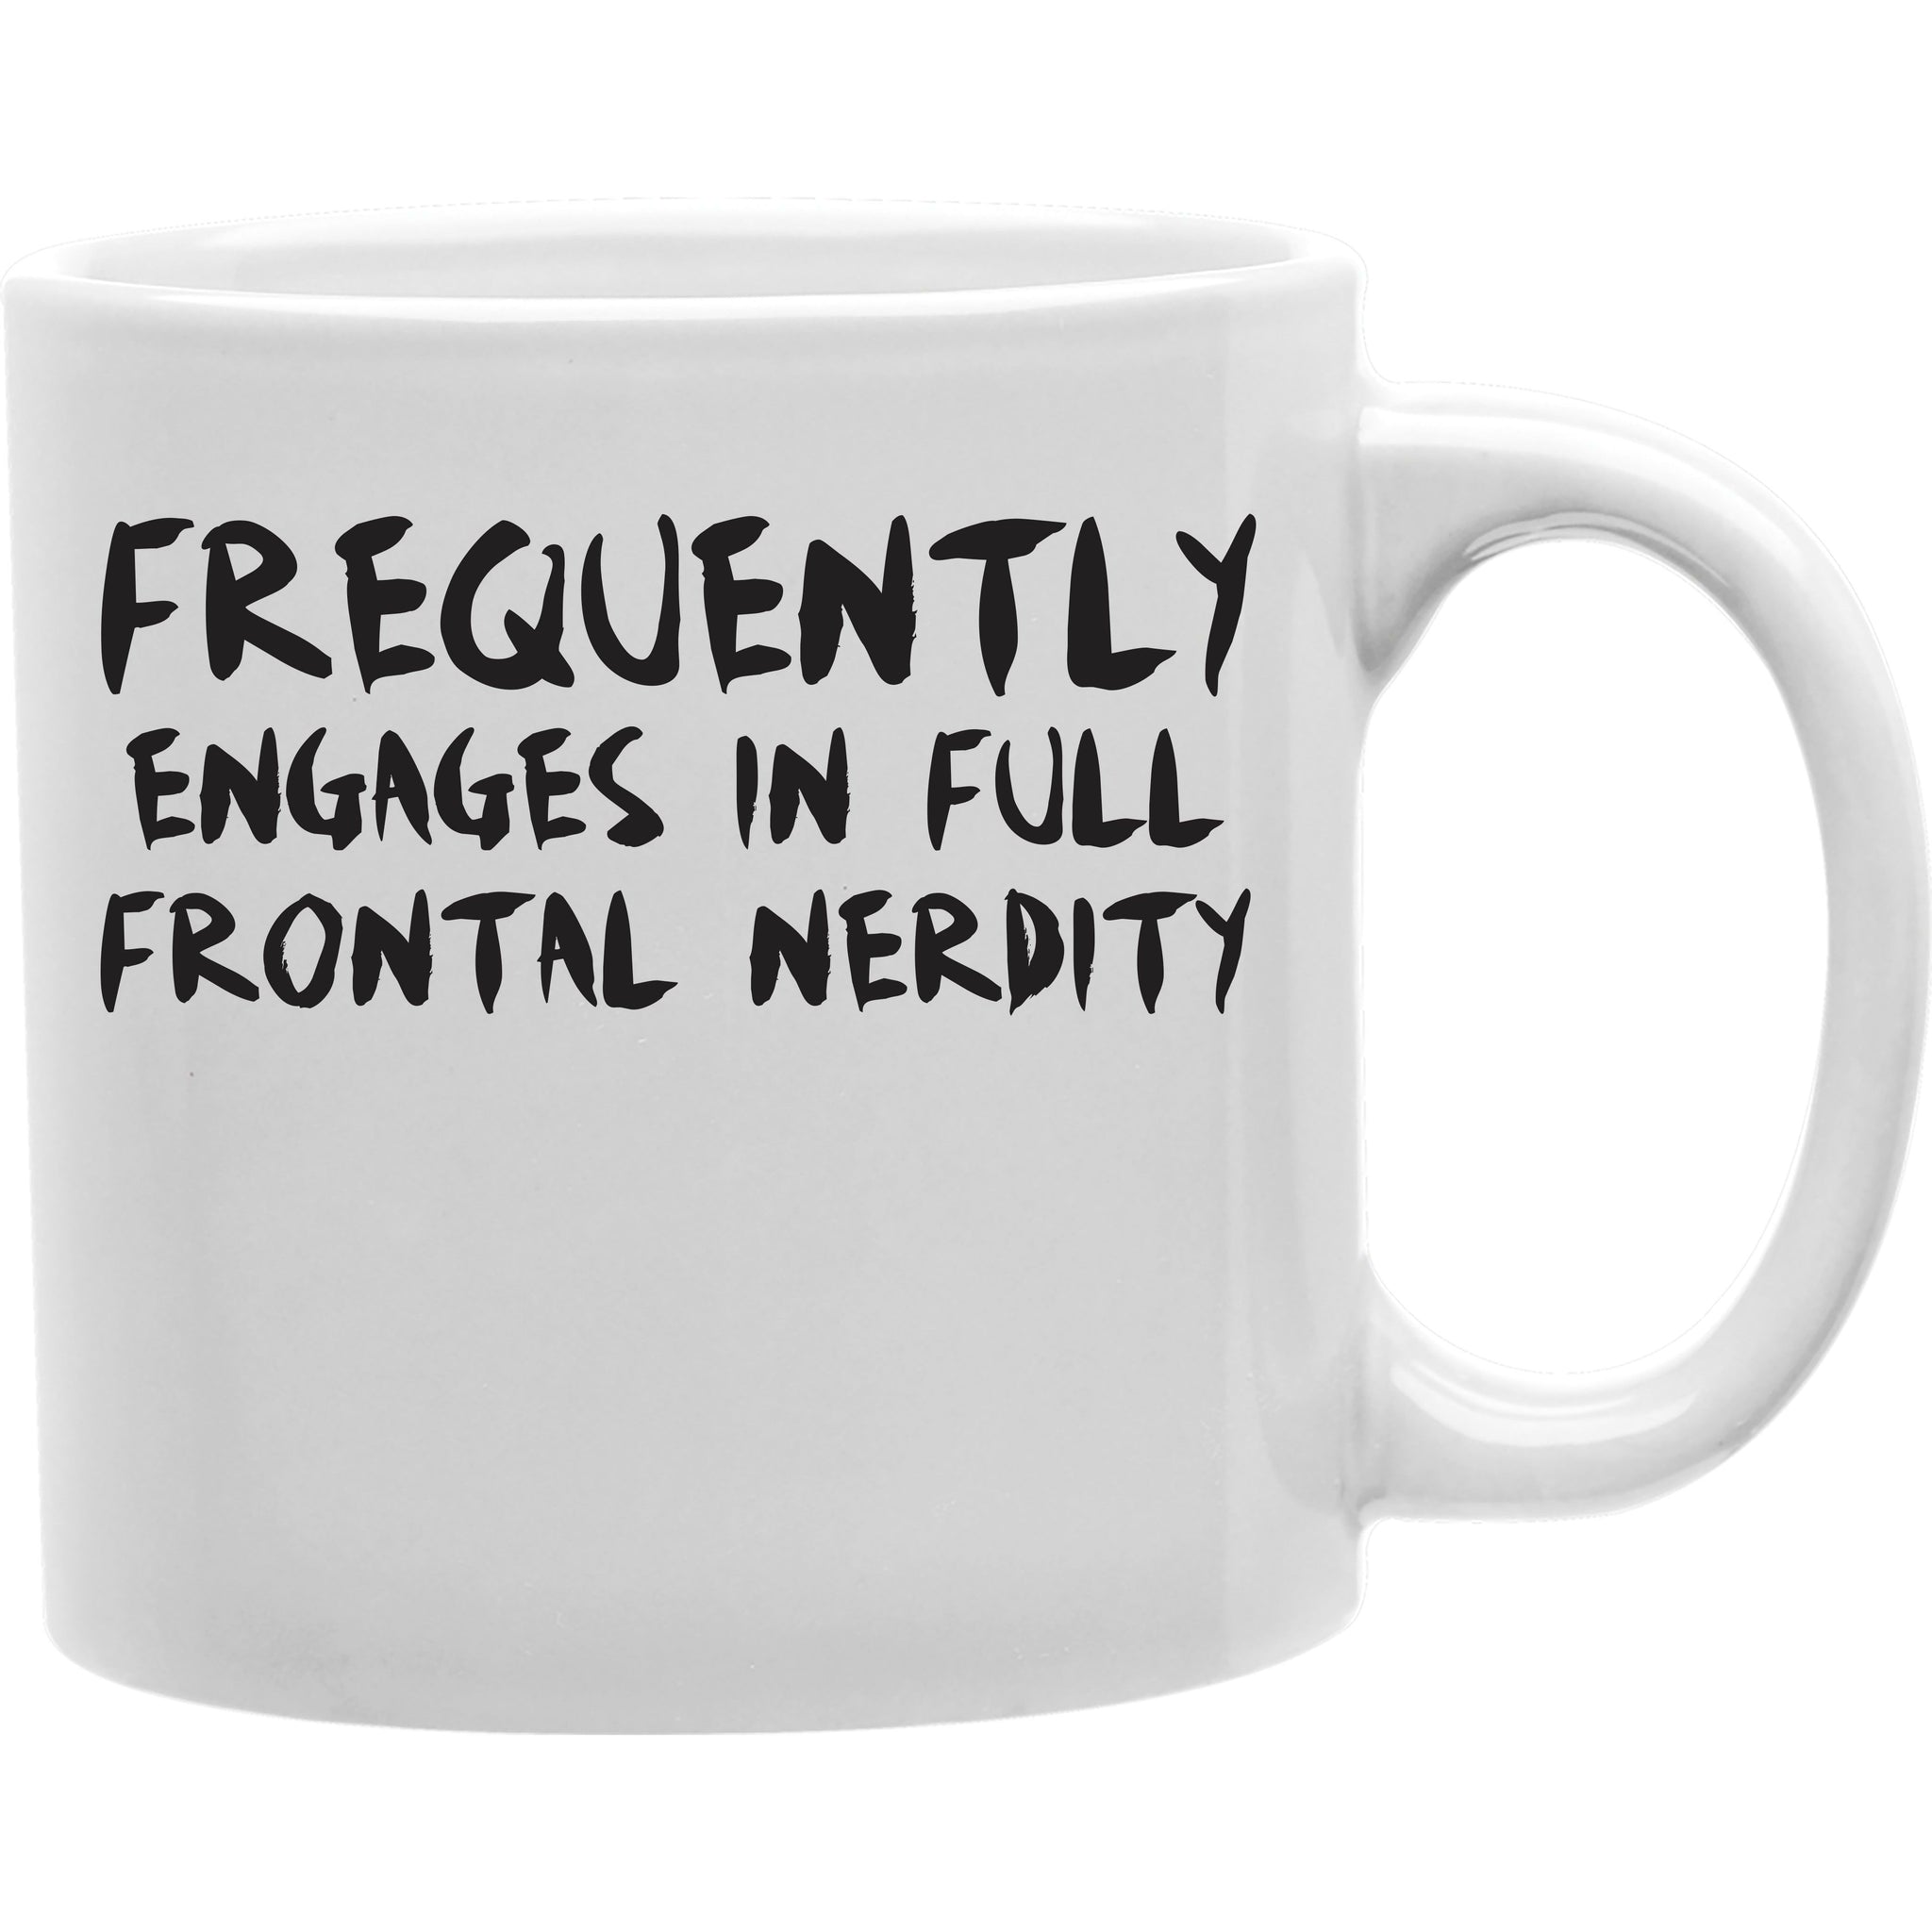 Frequently Engages In Full Frontal Nerdity Coffee Mug  Coffee and Tea Ceramic  Mug 11oz